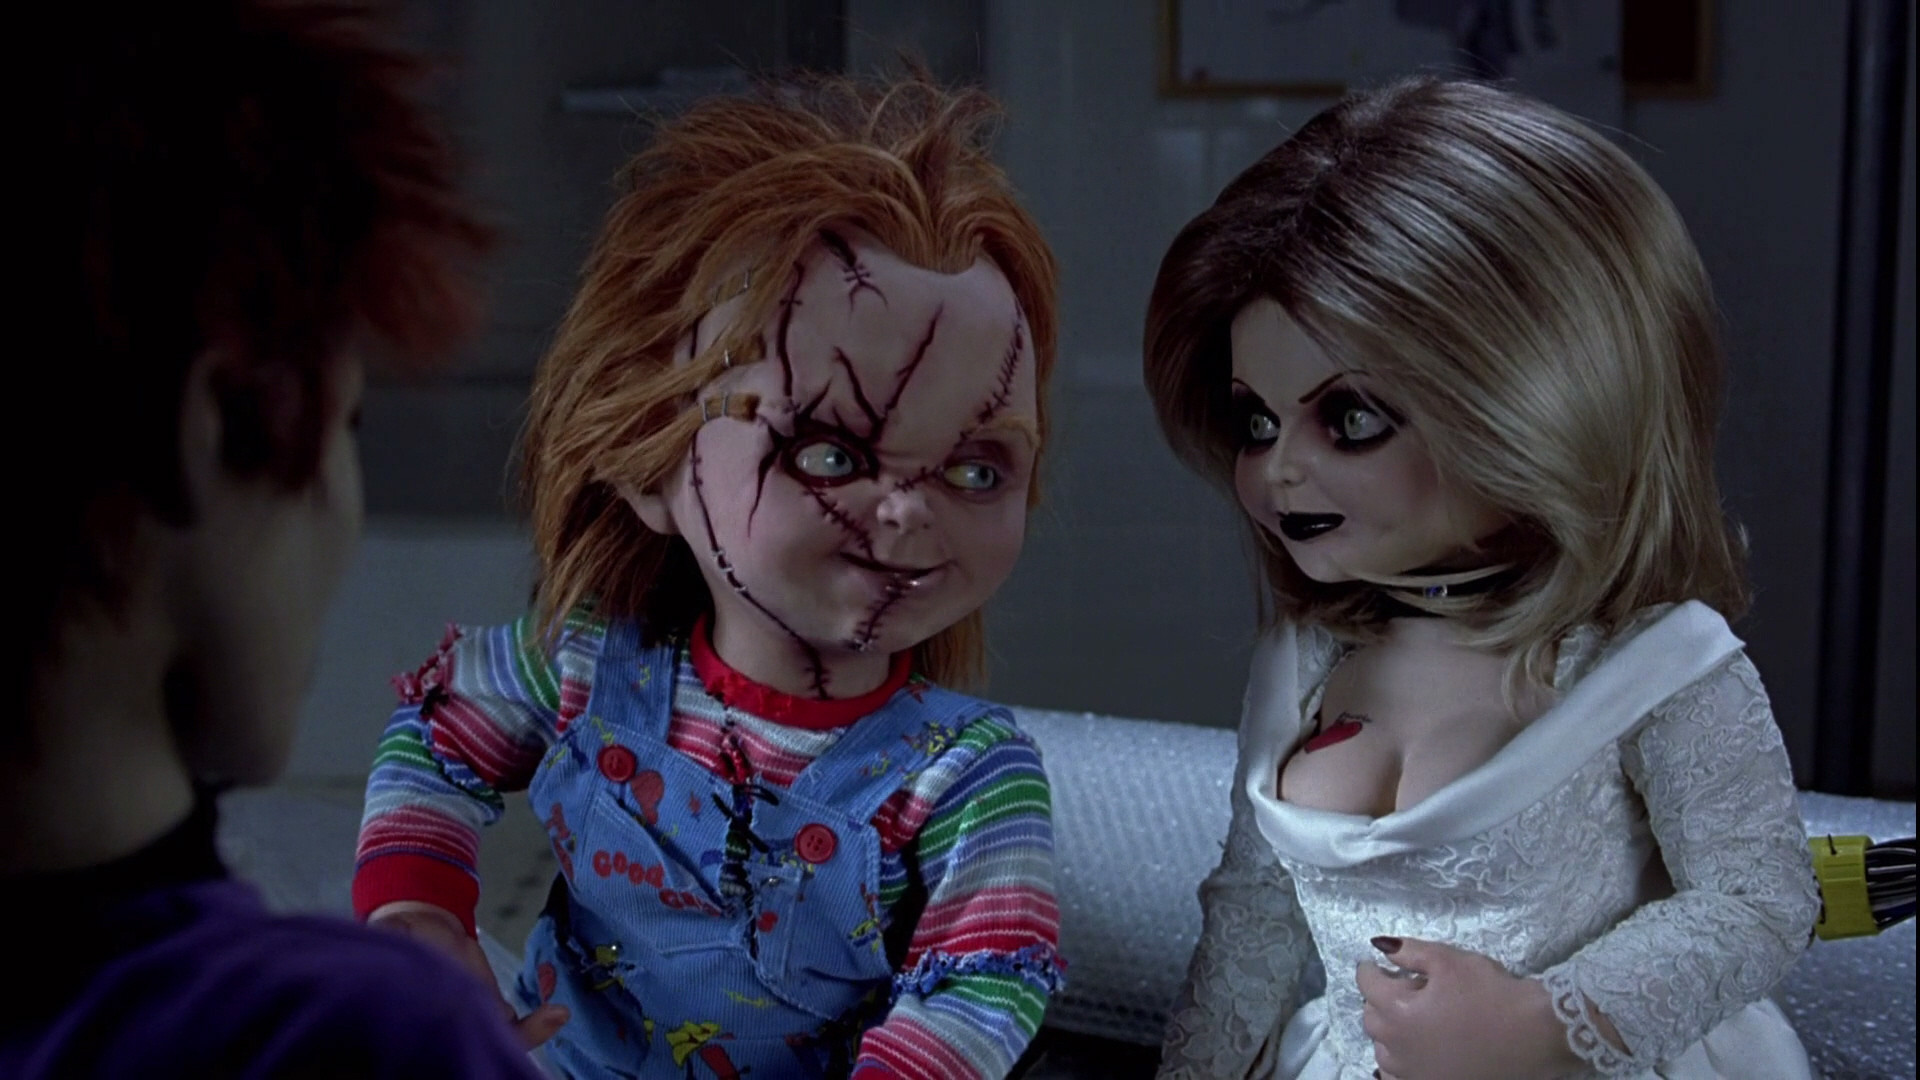 Pin Pin Chucky An Tiffany Childs Play Wallpaper 25673277 Fanpop On on .